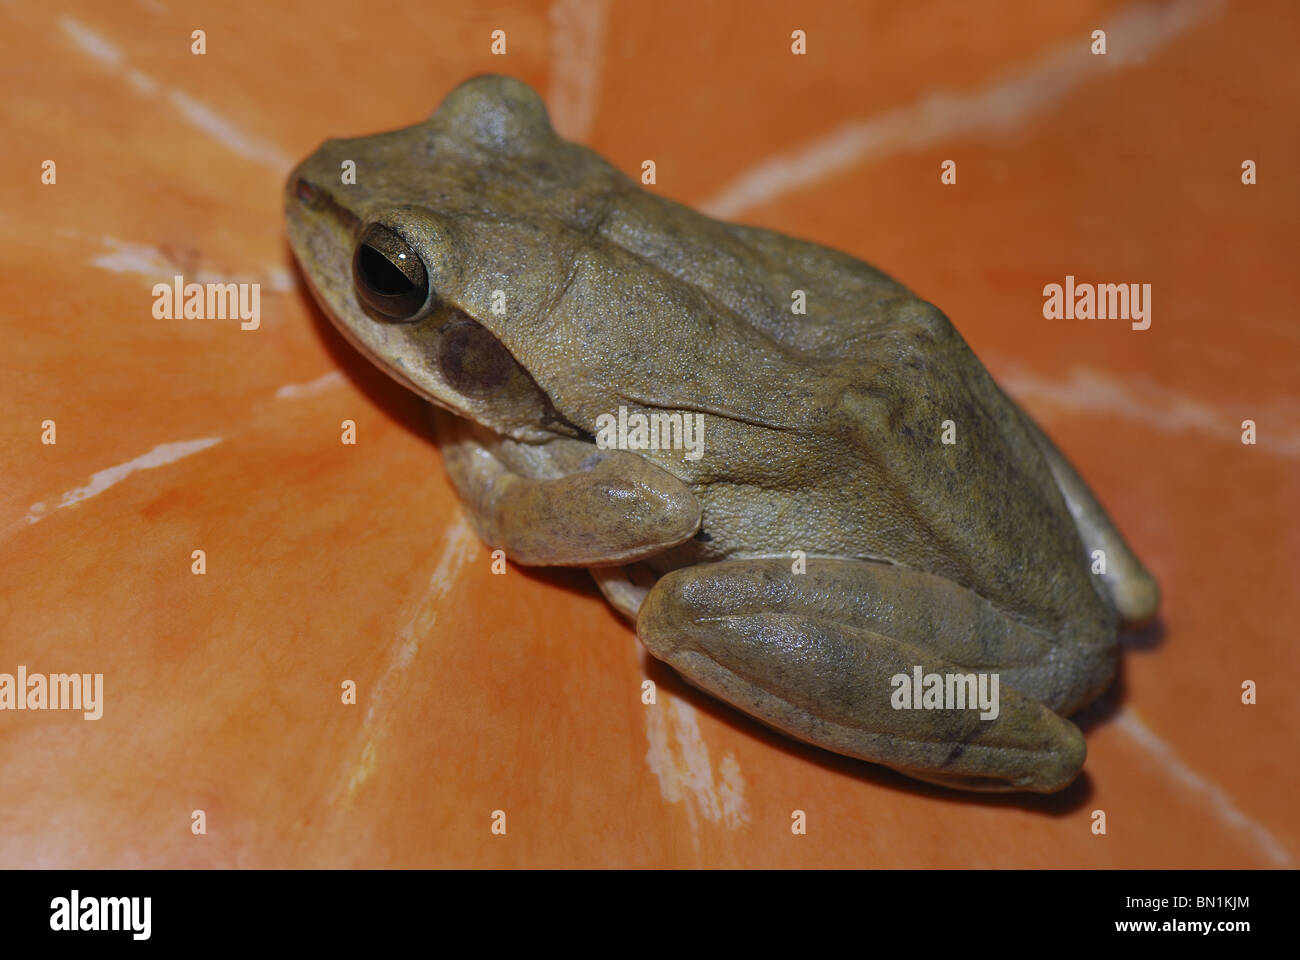 Common Indian Tree Frog (Polypedates maculatus) is sitting on pumpkin in Mocha village near Kanha National Park Stock Photo